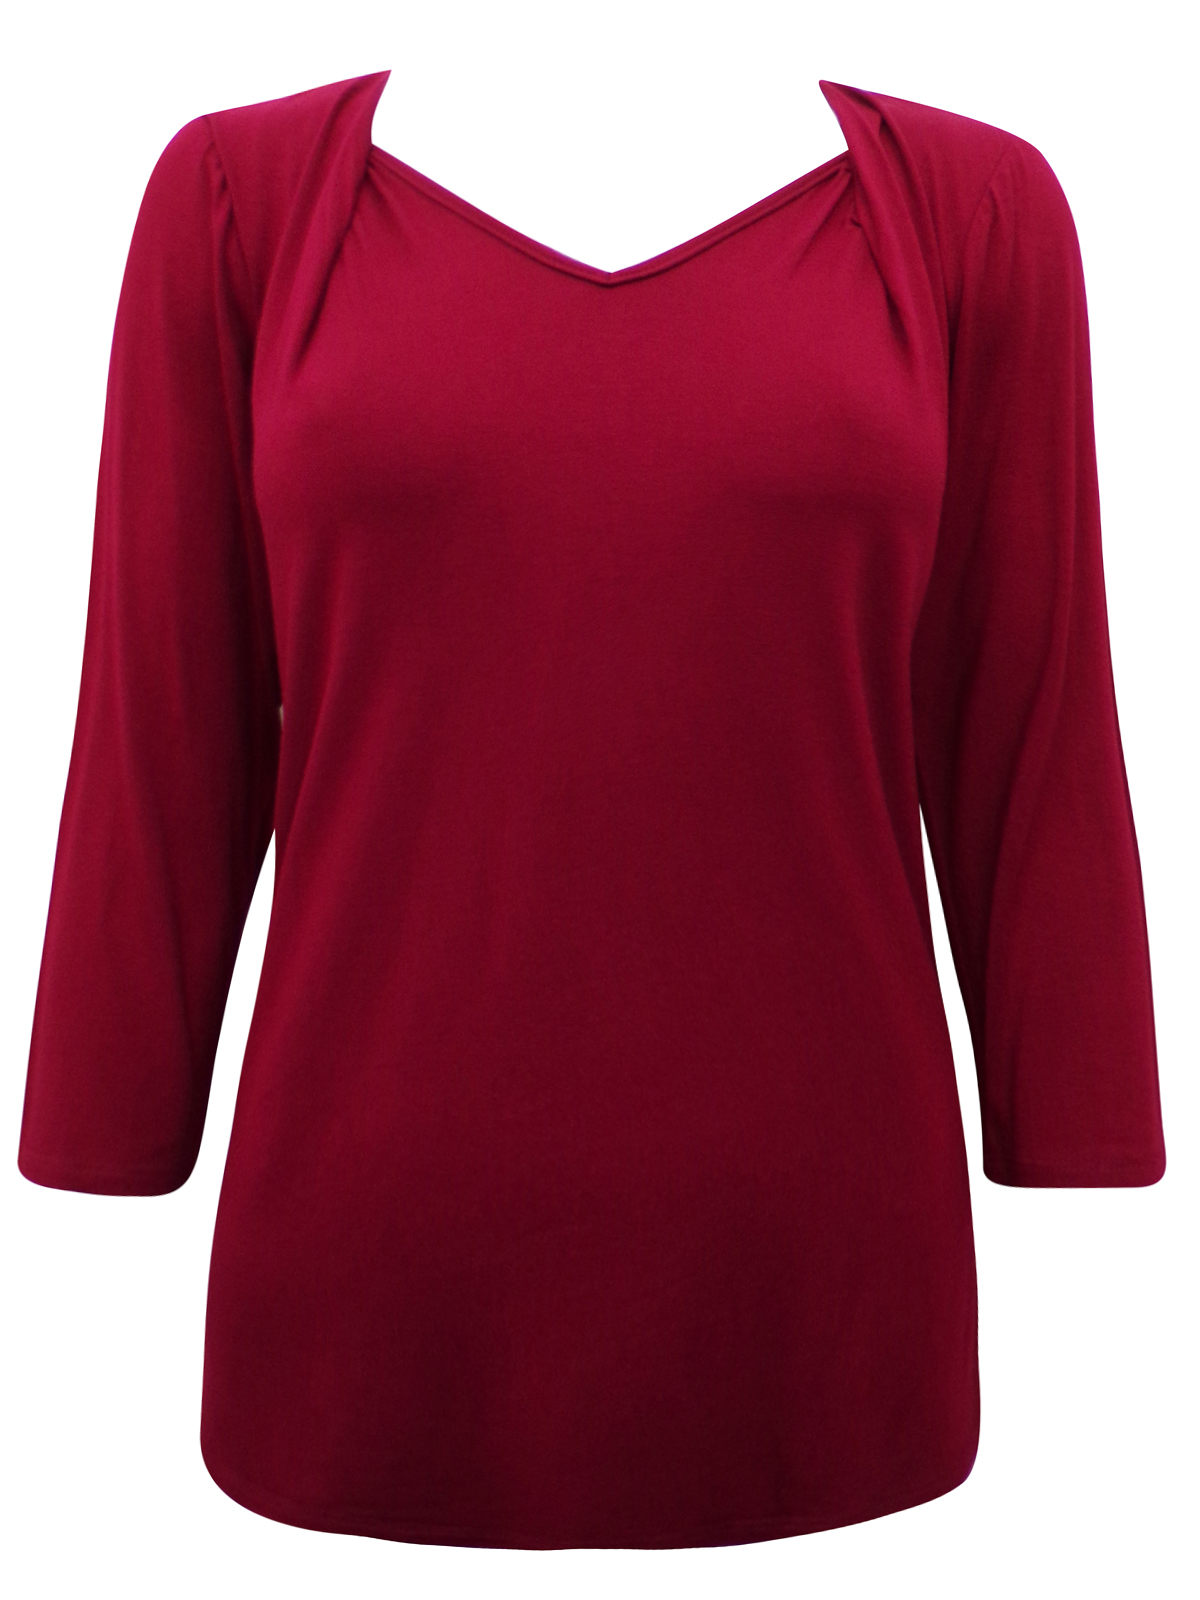 First Avenue BURGUNDY Twist V-Neck 3/4 Sleeve Jersey Top - Size 12 to 20